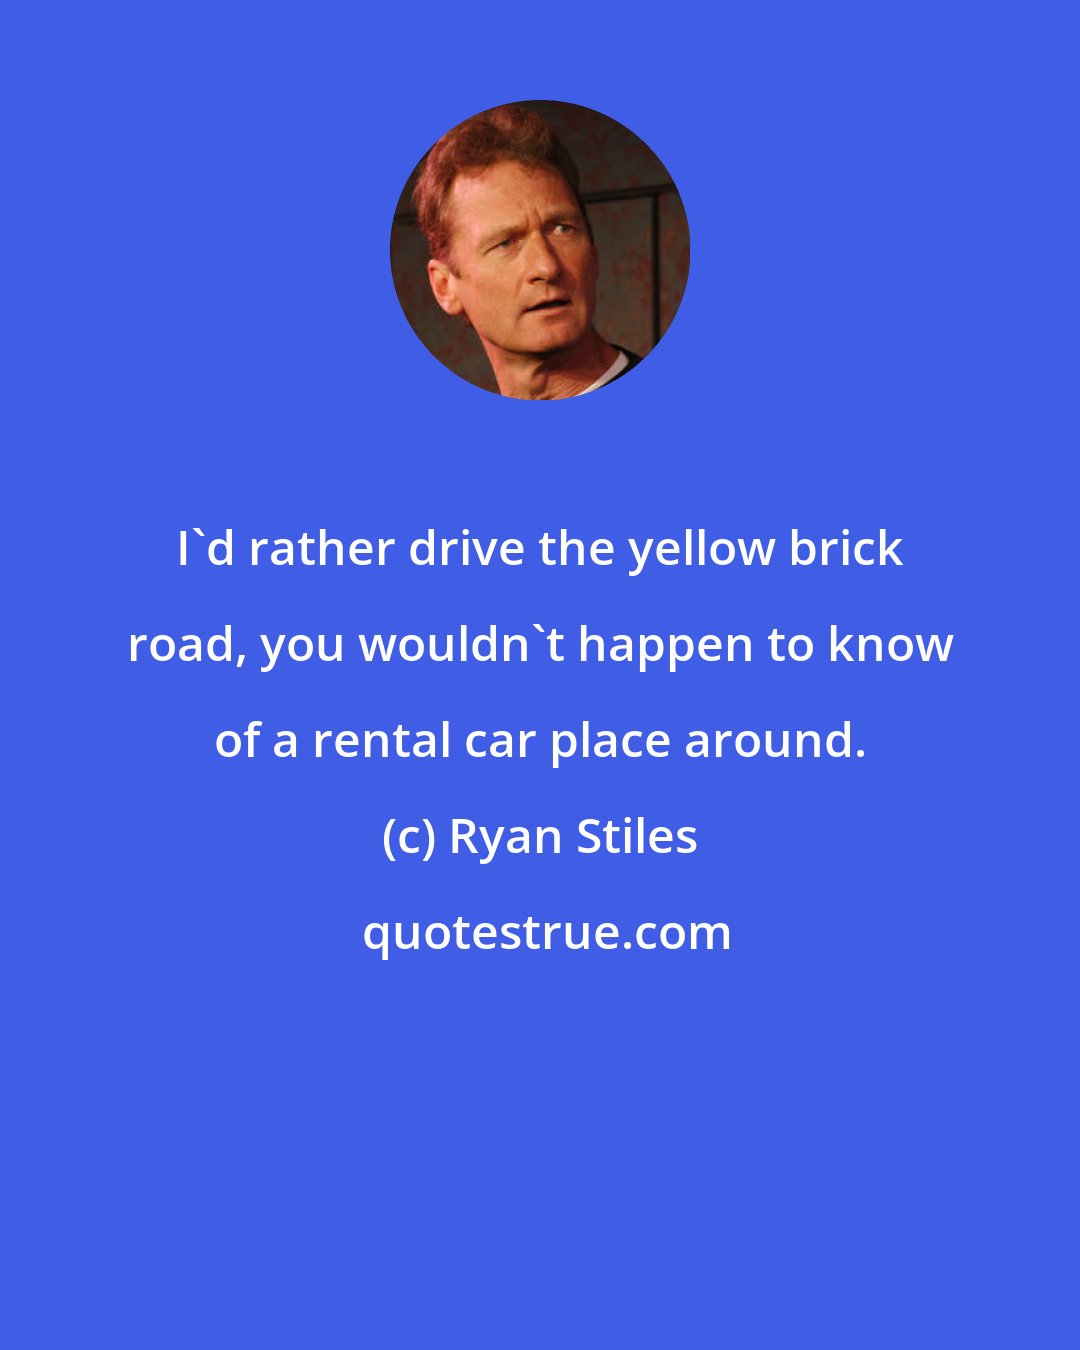 Ryan Stiles: I'd rather drive the yellow brick road, you wouldn't happen to know of a rental car place around.